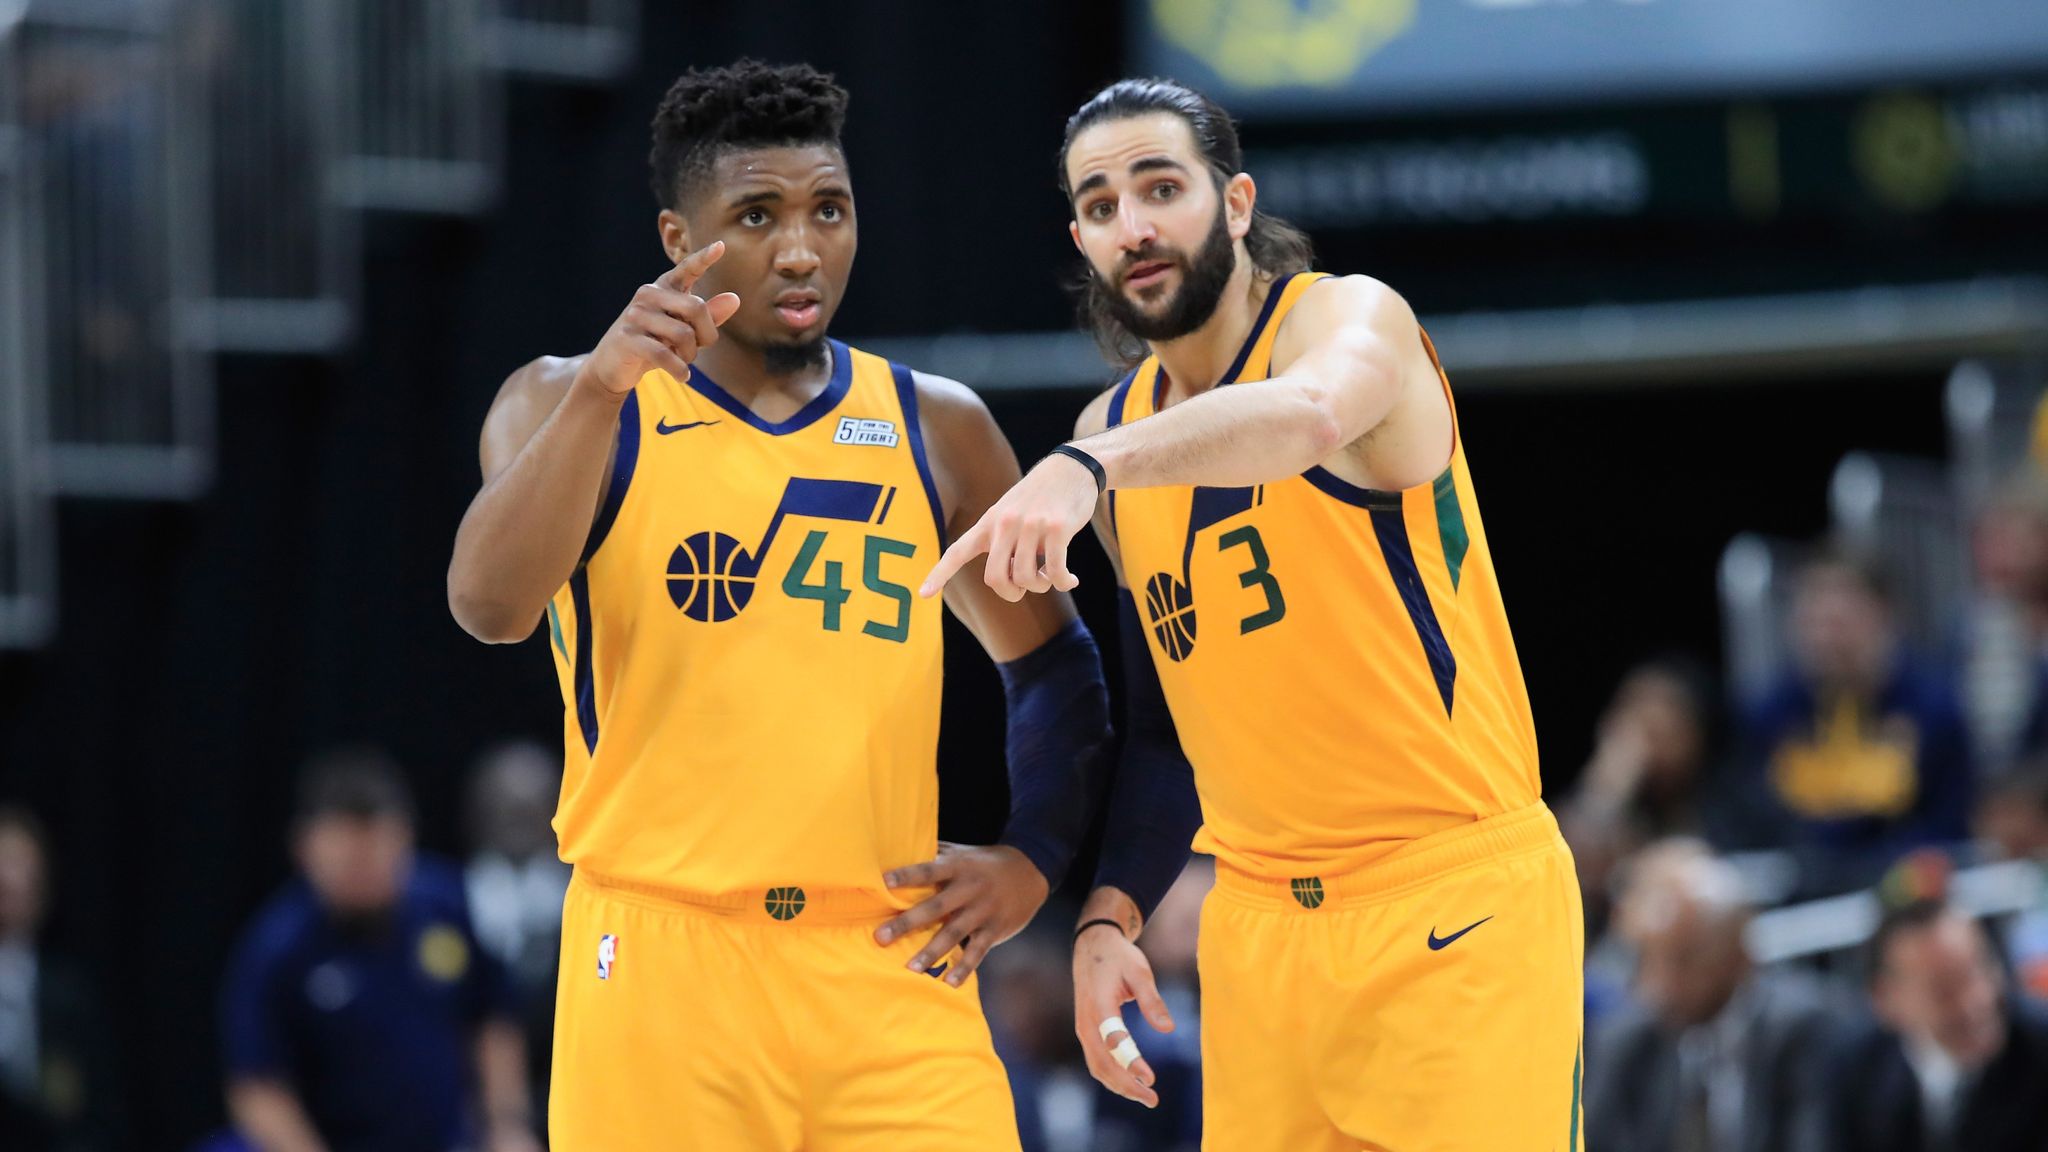 Does Ricky Rubio have a future with the Utah Jazz?